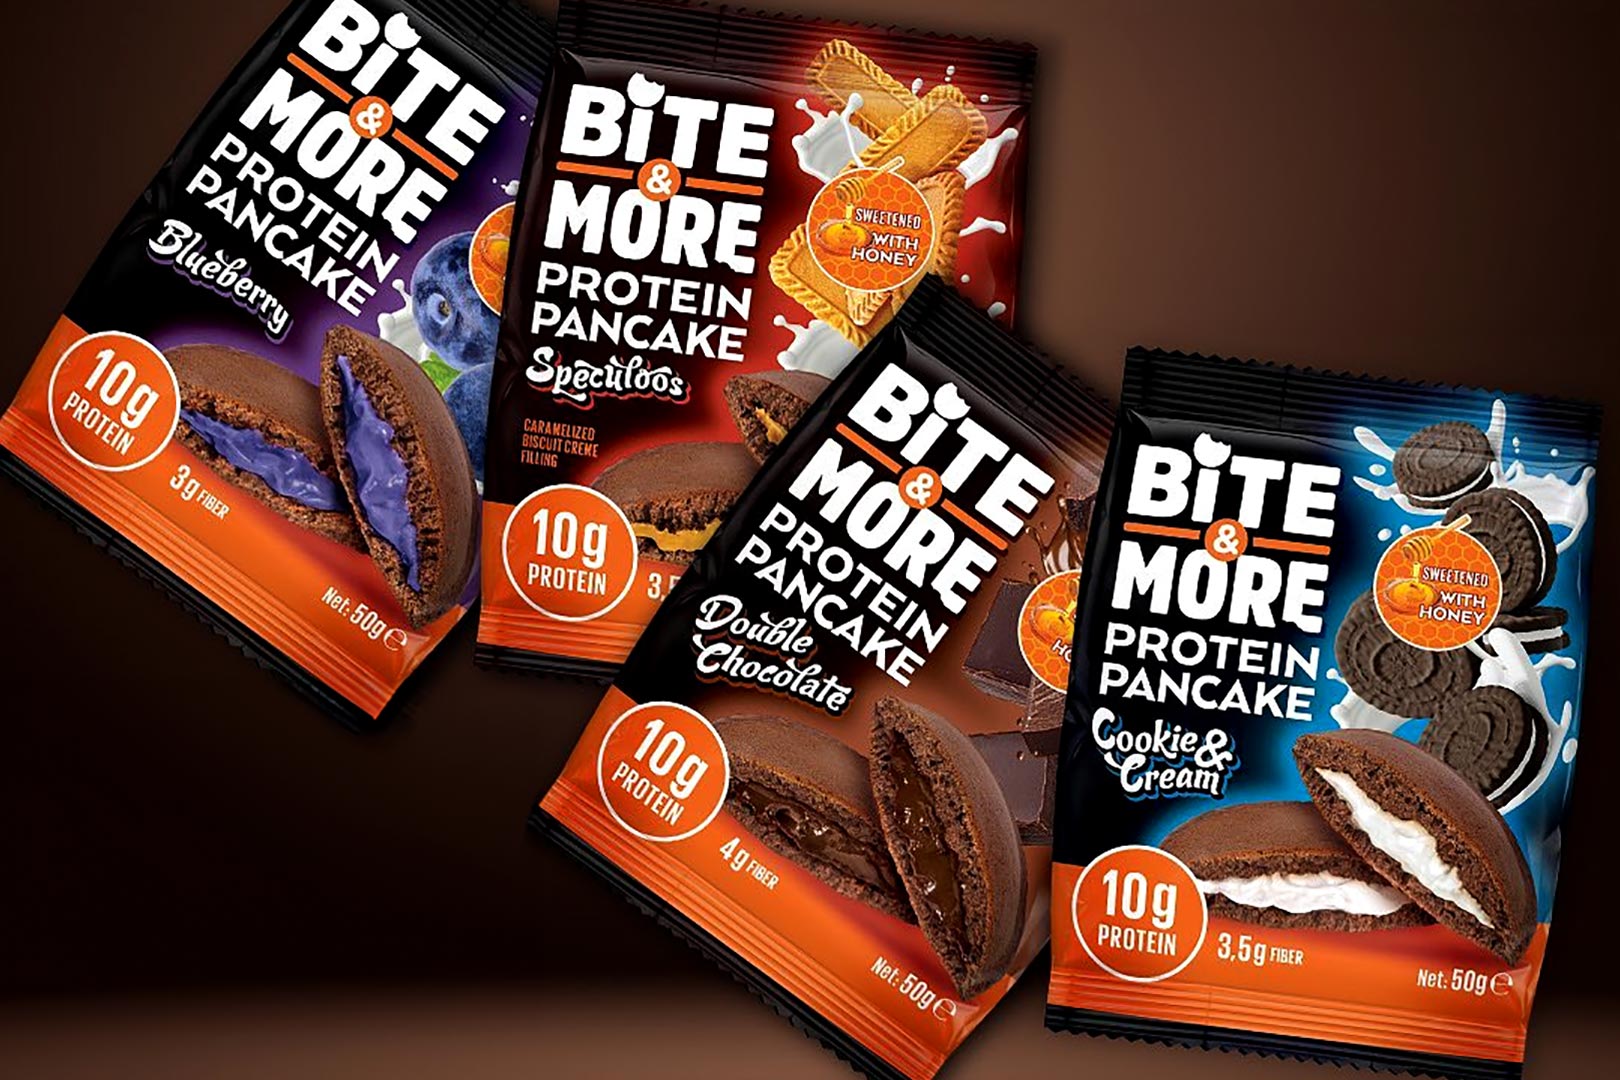 Bite And More Chocolate Flavors Of Protein Pancake